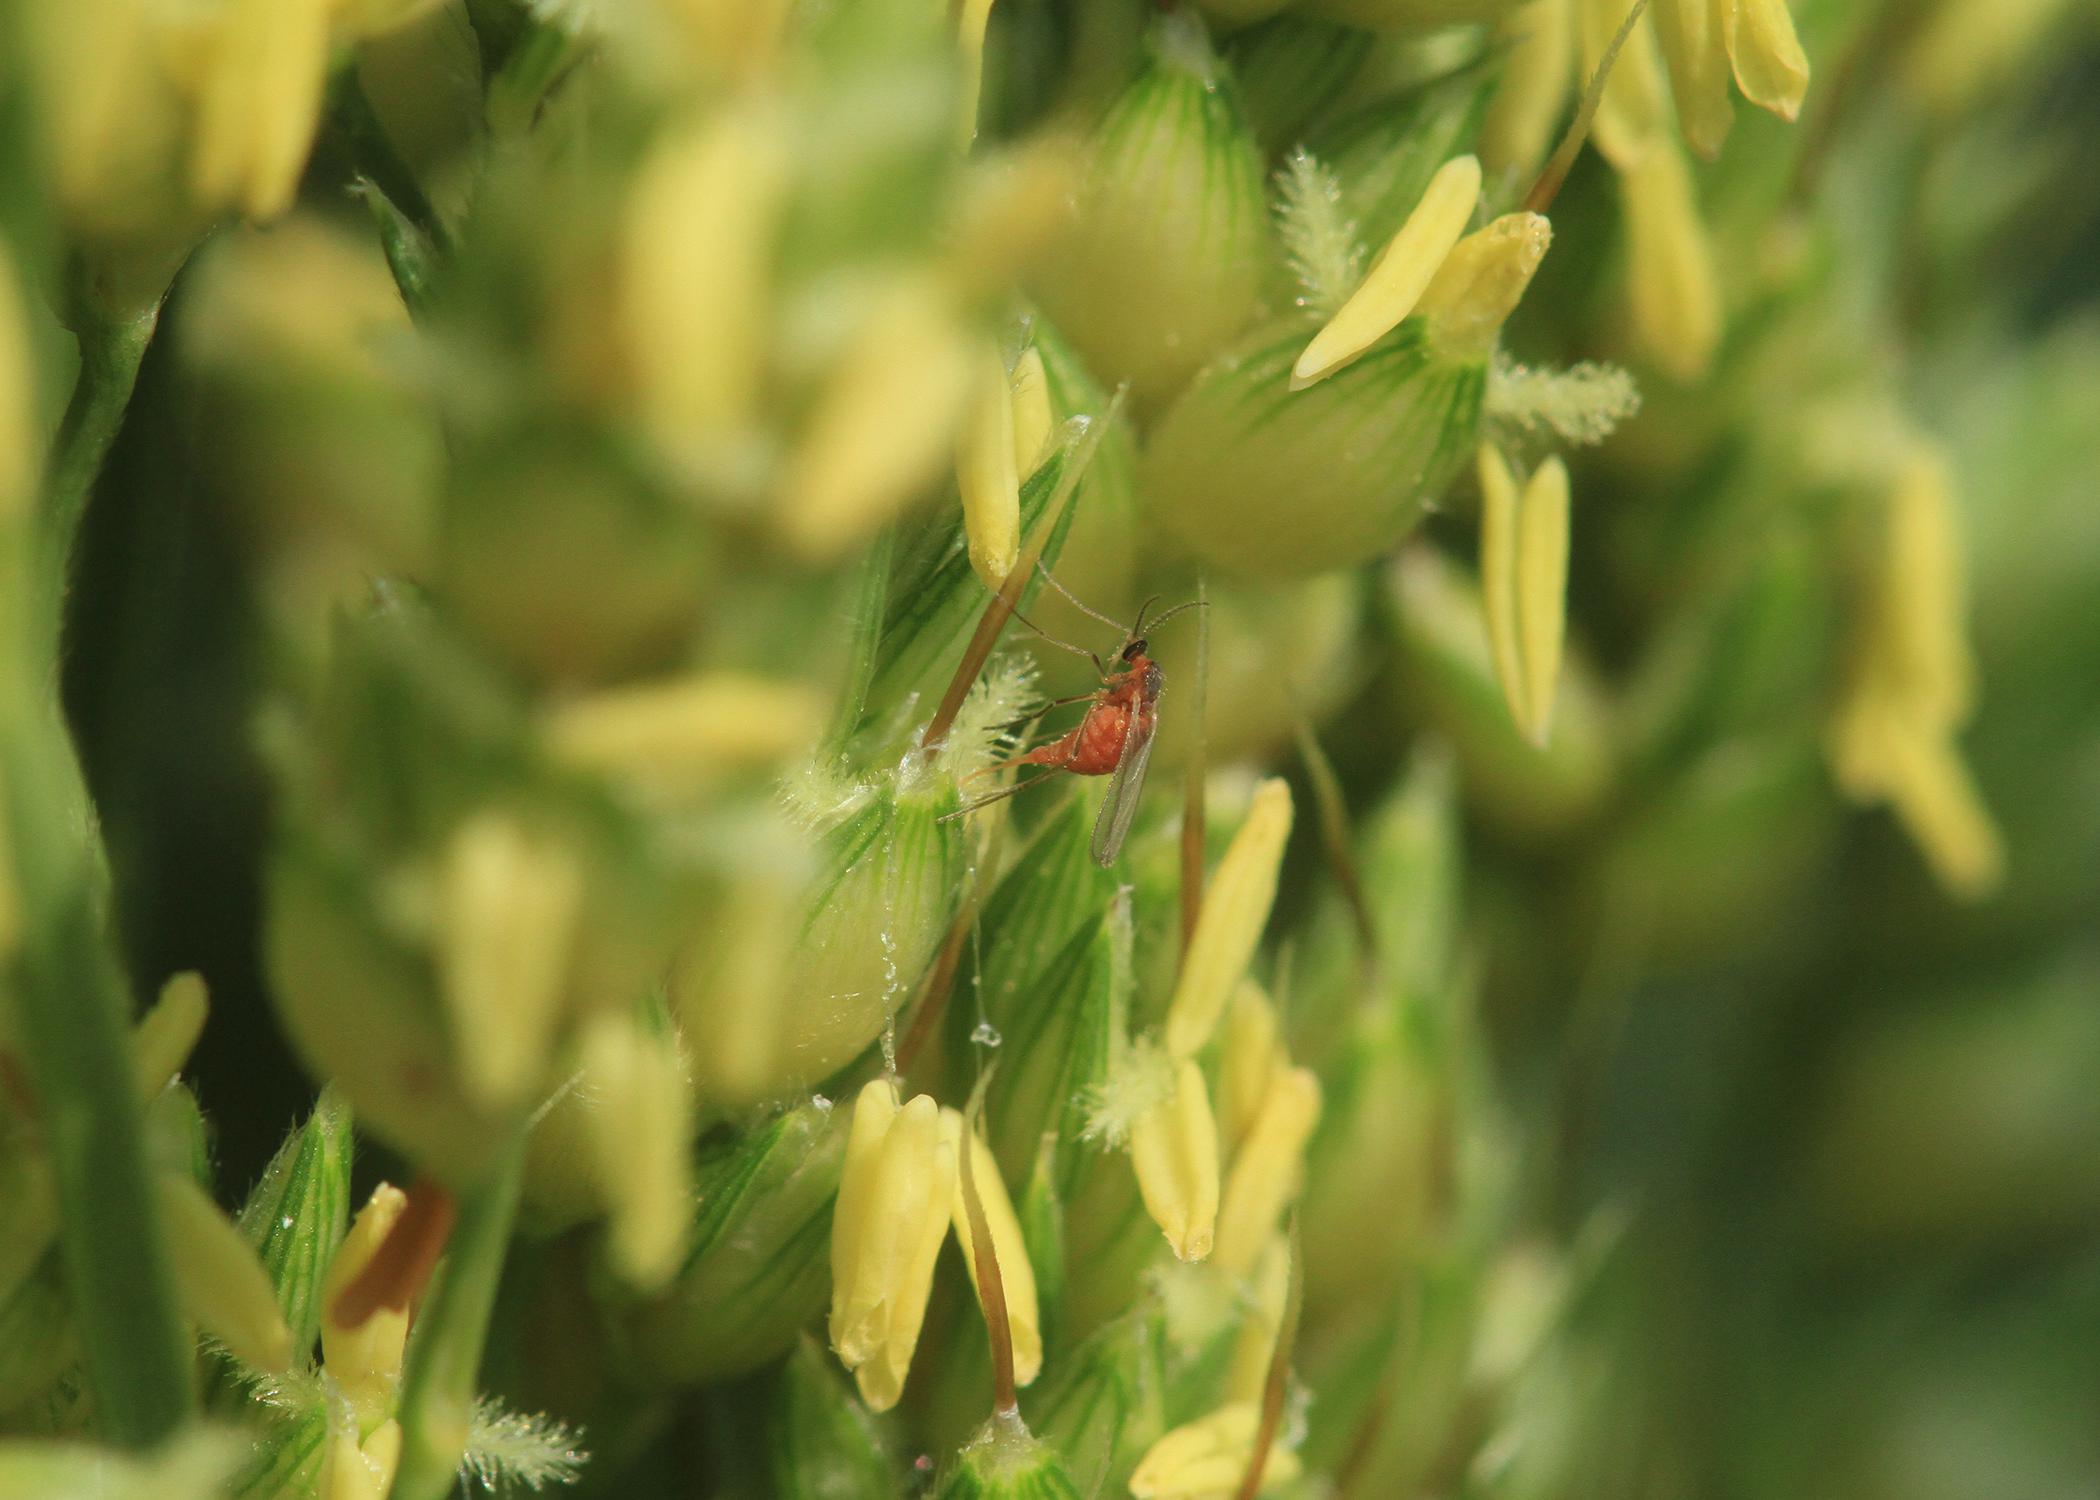 This year, producers planted about 90,000 acres of grain sorghum throughout the state. Early plantings have been affected more than usual by the sorghum midge, an insect that feeds on plants while they are in bloom. (Submitted photo)